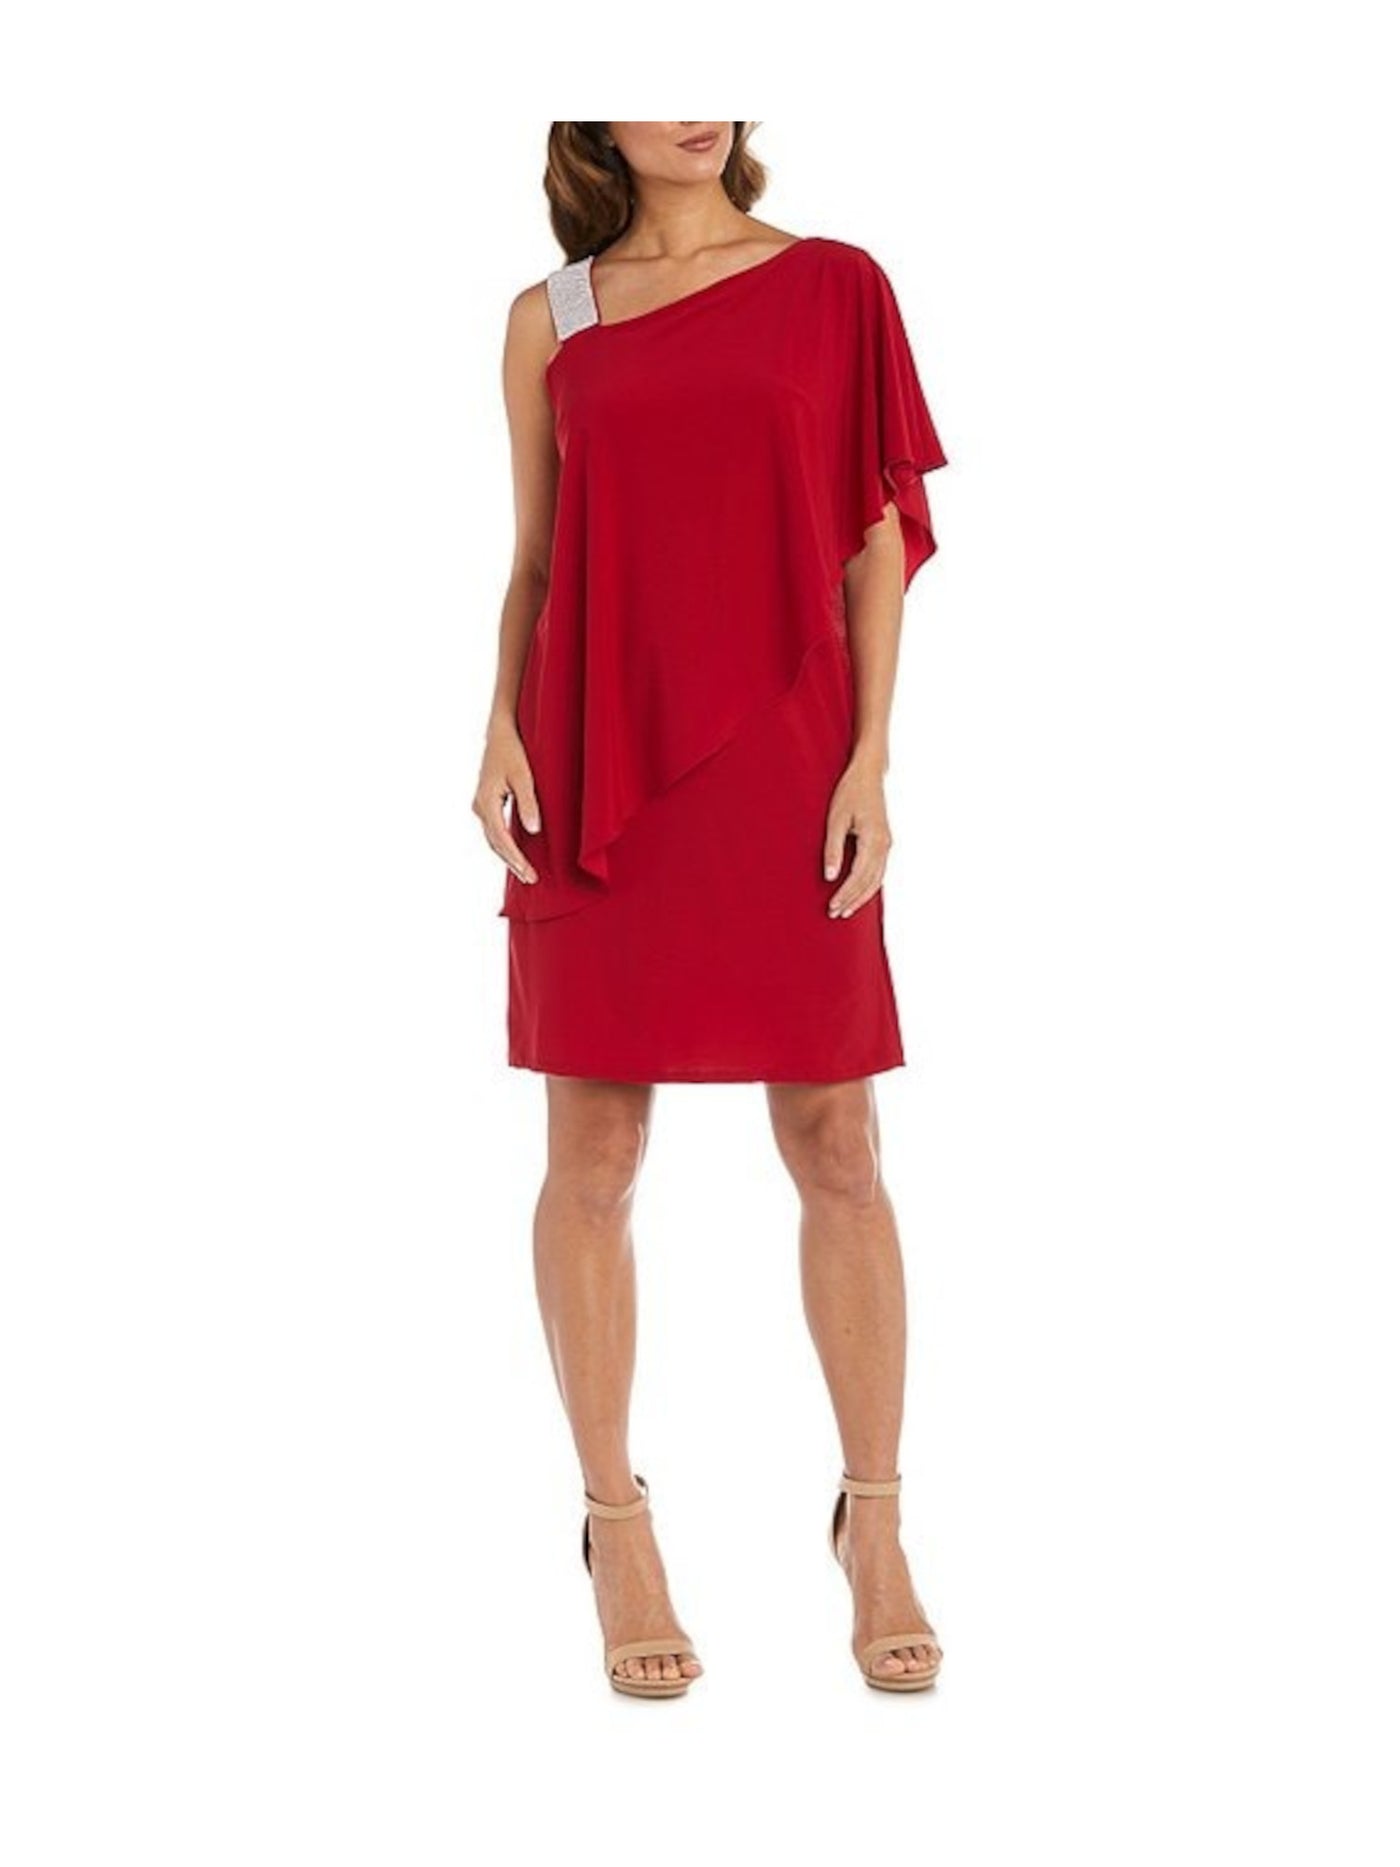 R&M RICHARDS Womens Red Embellished Ruffled Elbow Sleeve Asymmetrical Neckline Knee Length Party Shift Dress 16